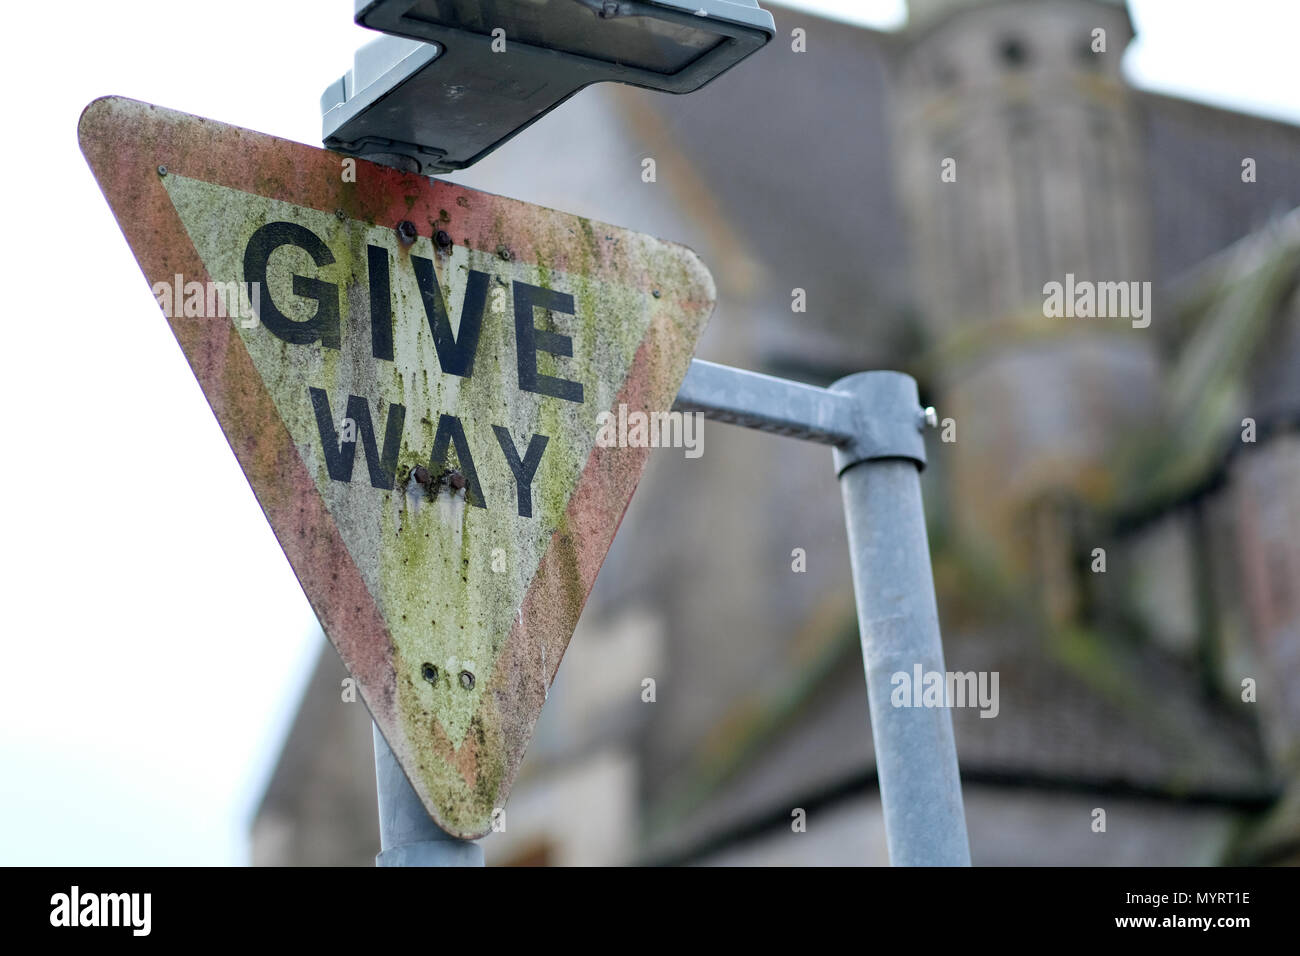 A dirty give way sign Stock Photo